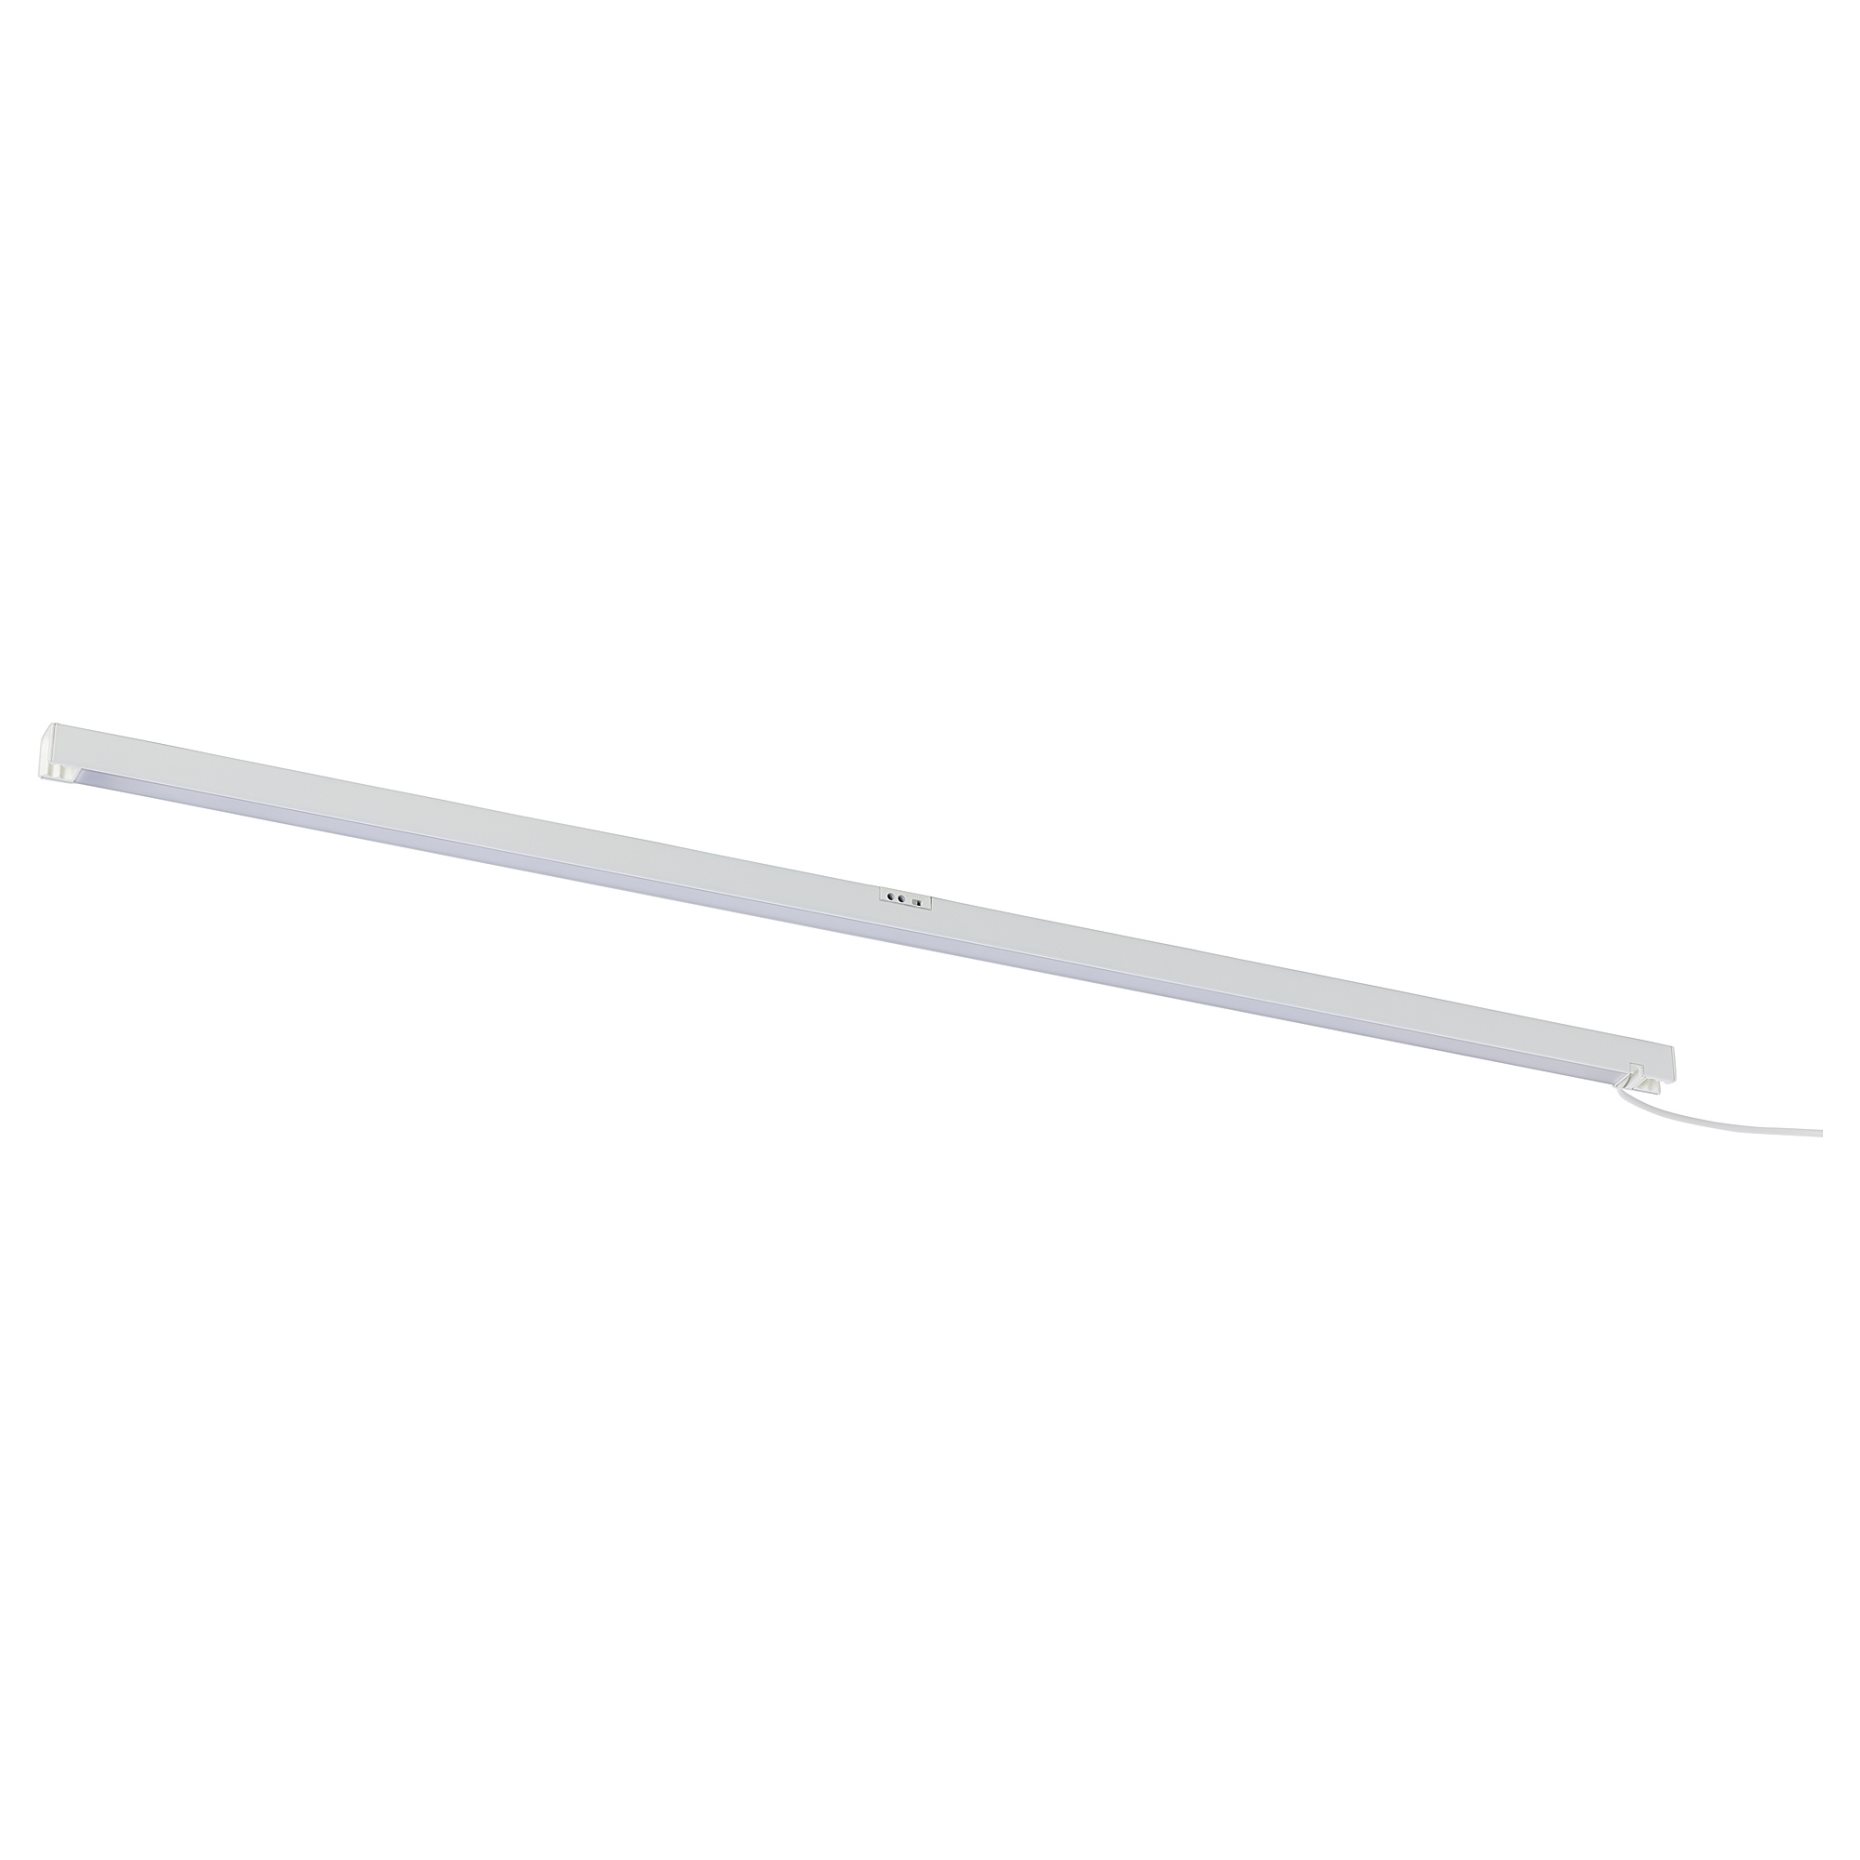 SKYDRAG, worktop/wardrobe lighting strip with sensor and built-in LED light source/dimmable, 60 cm, 605.293.76